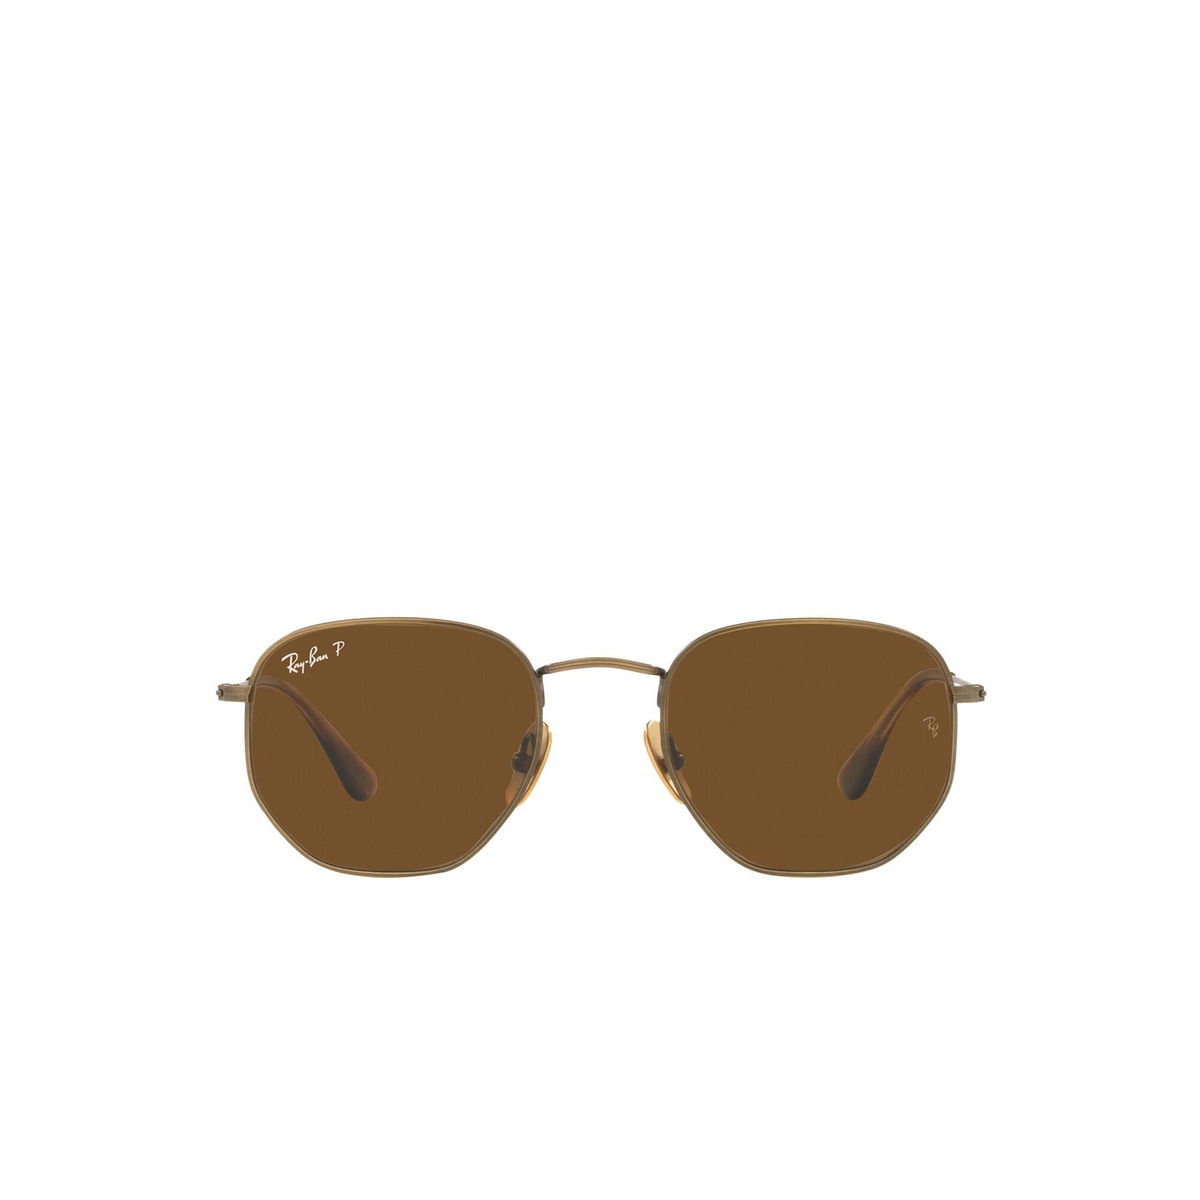 Ray-Ban HEXAGONAL Sunglasses 920757 Demigloss Antique Gold - front view